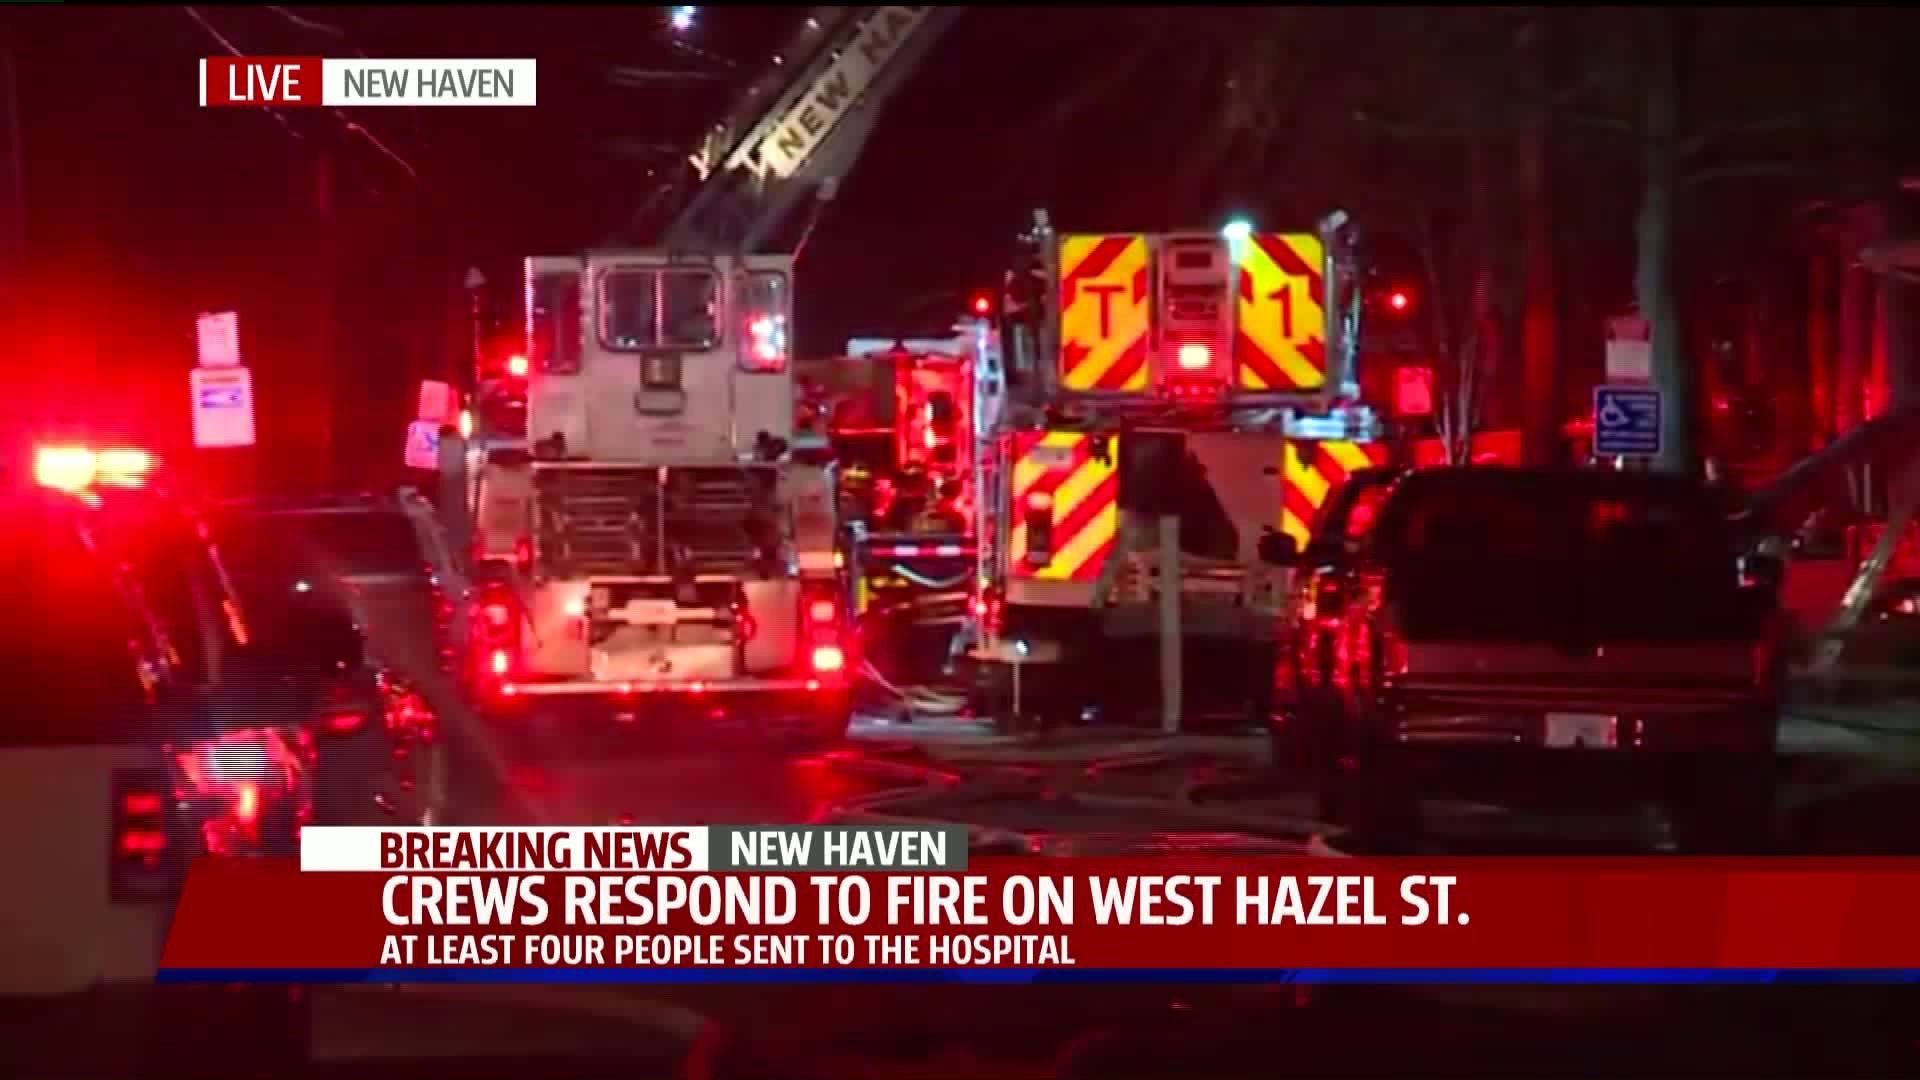 3 alarm fire in New Haven sends 4 to hospital